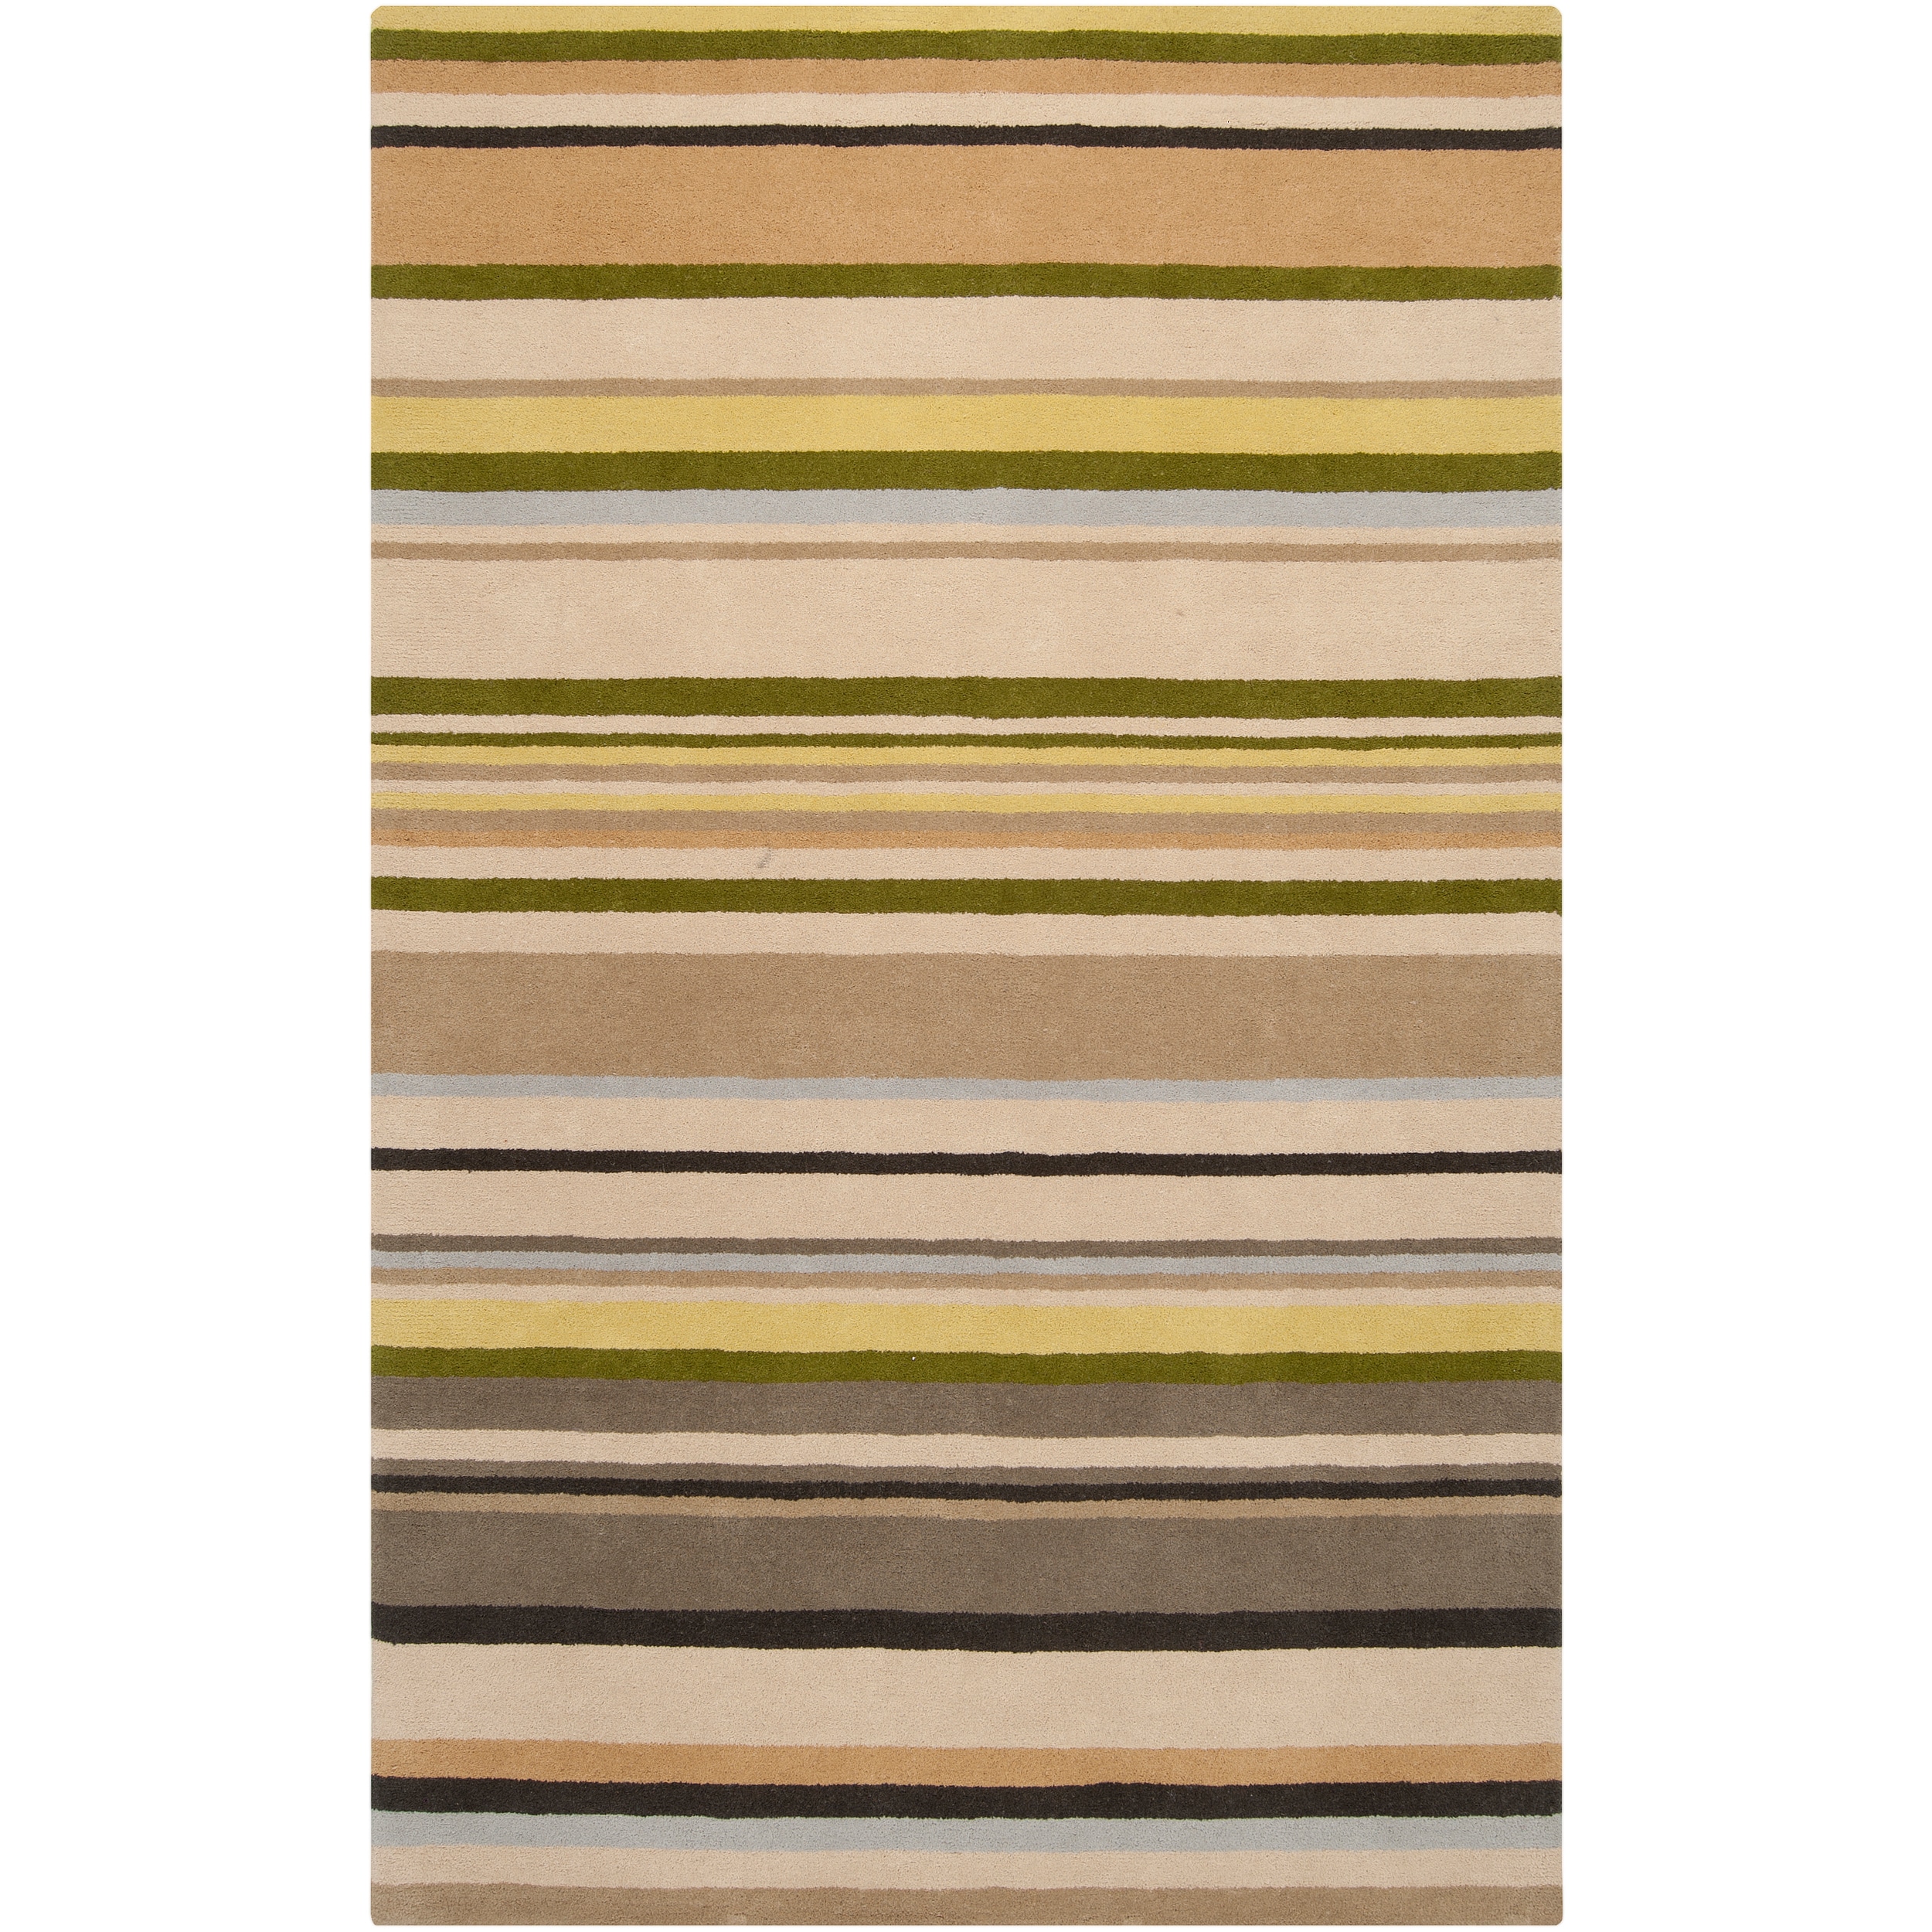 Harlequin Hand tufted Beige Opaque Striped Wool Rug (8 X 10)